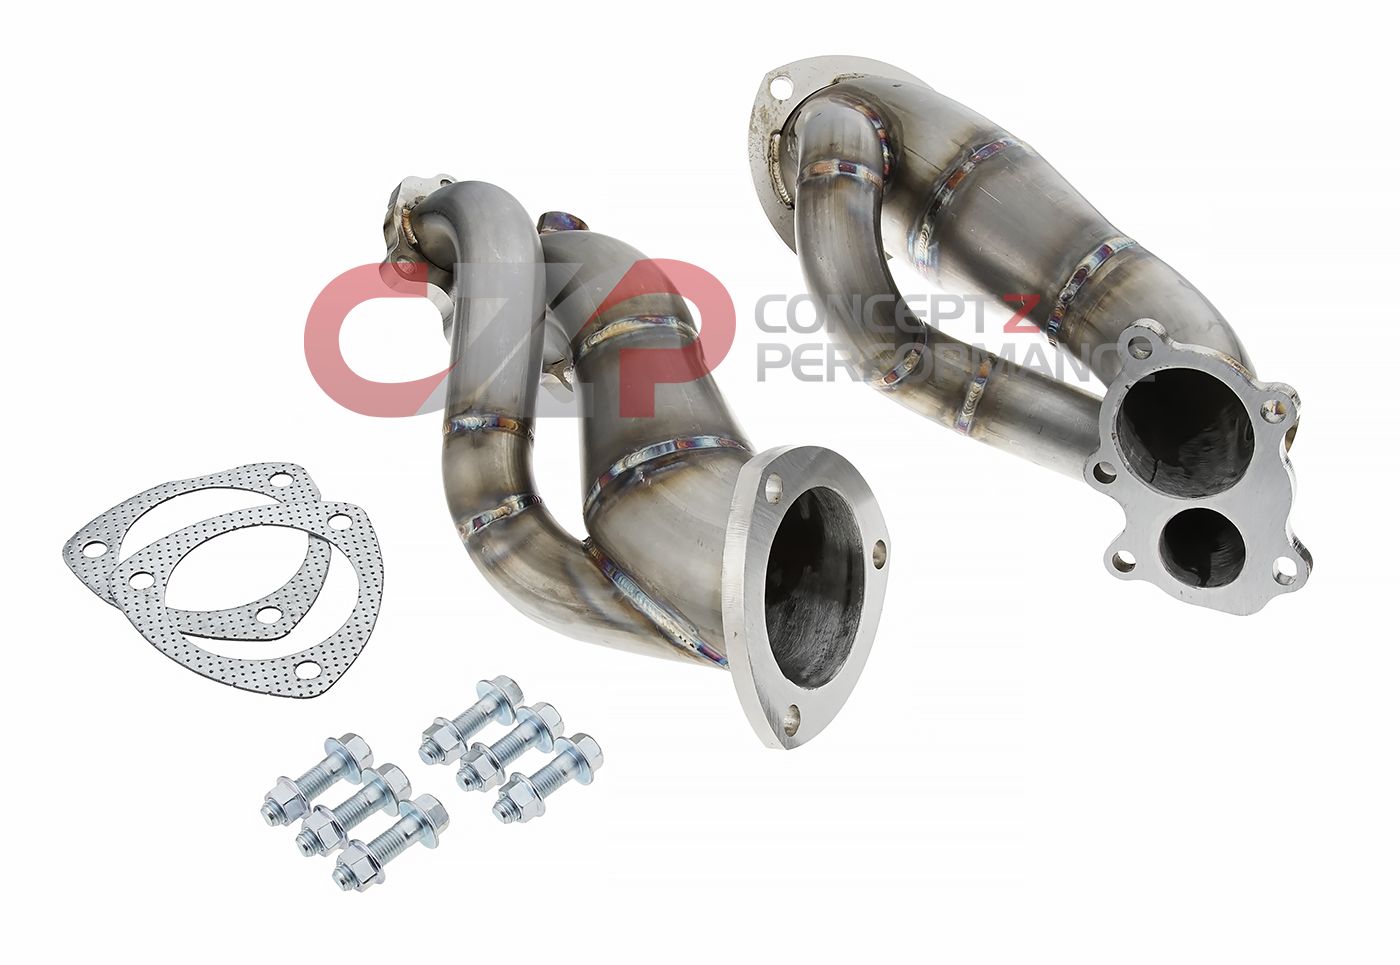 Specialty Z Expansion Downpipes, 3" Stainless Steel 5-Bolt - Nissan 300ZX Z32